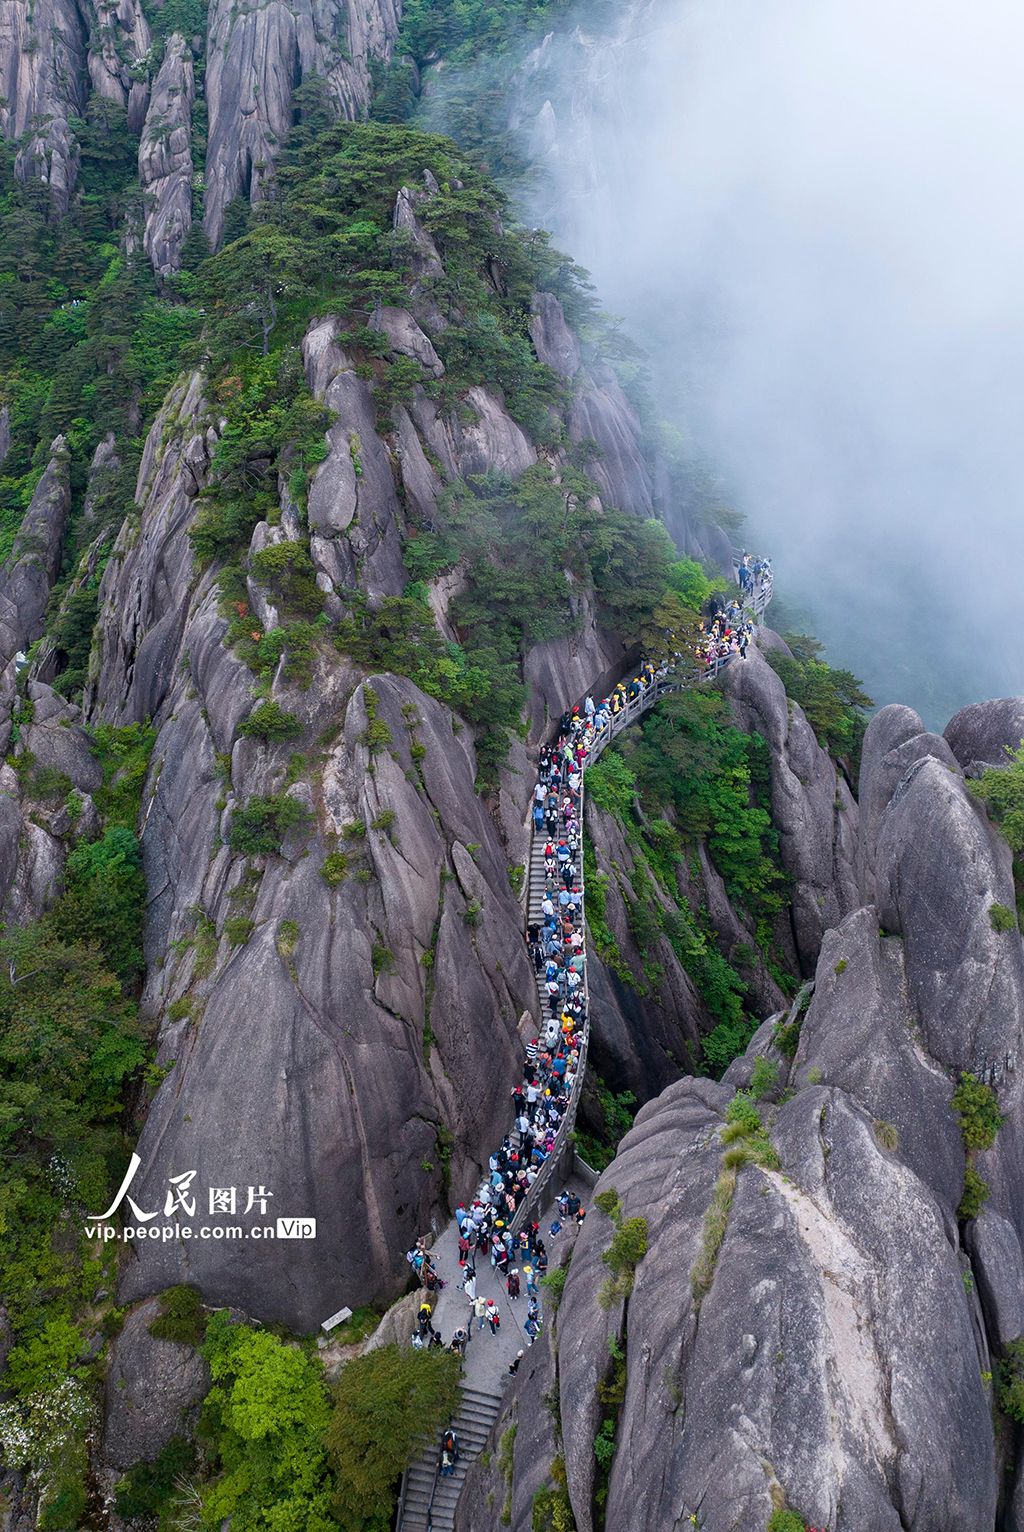  Anhui: Huangshan is full of tourists [7]